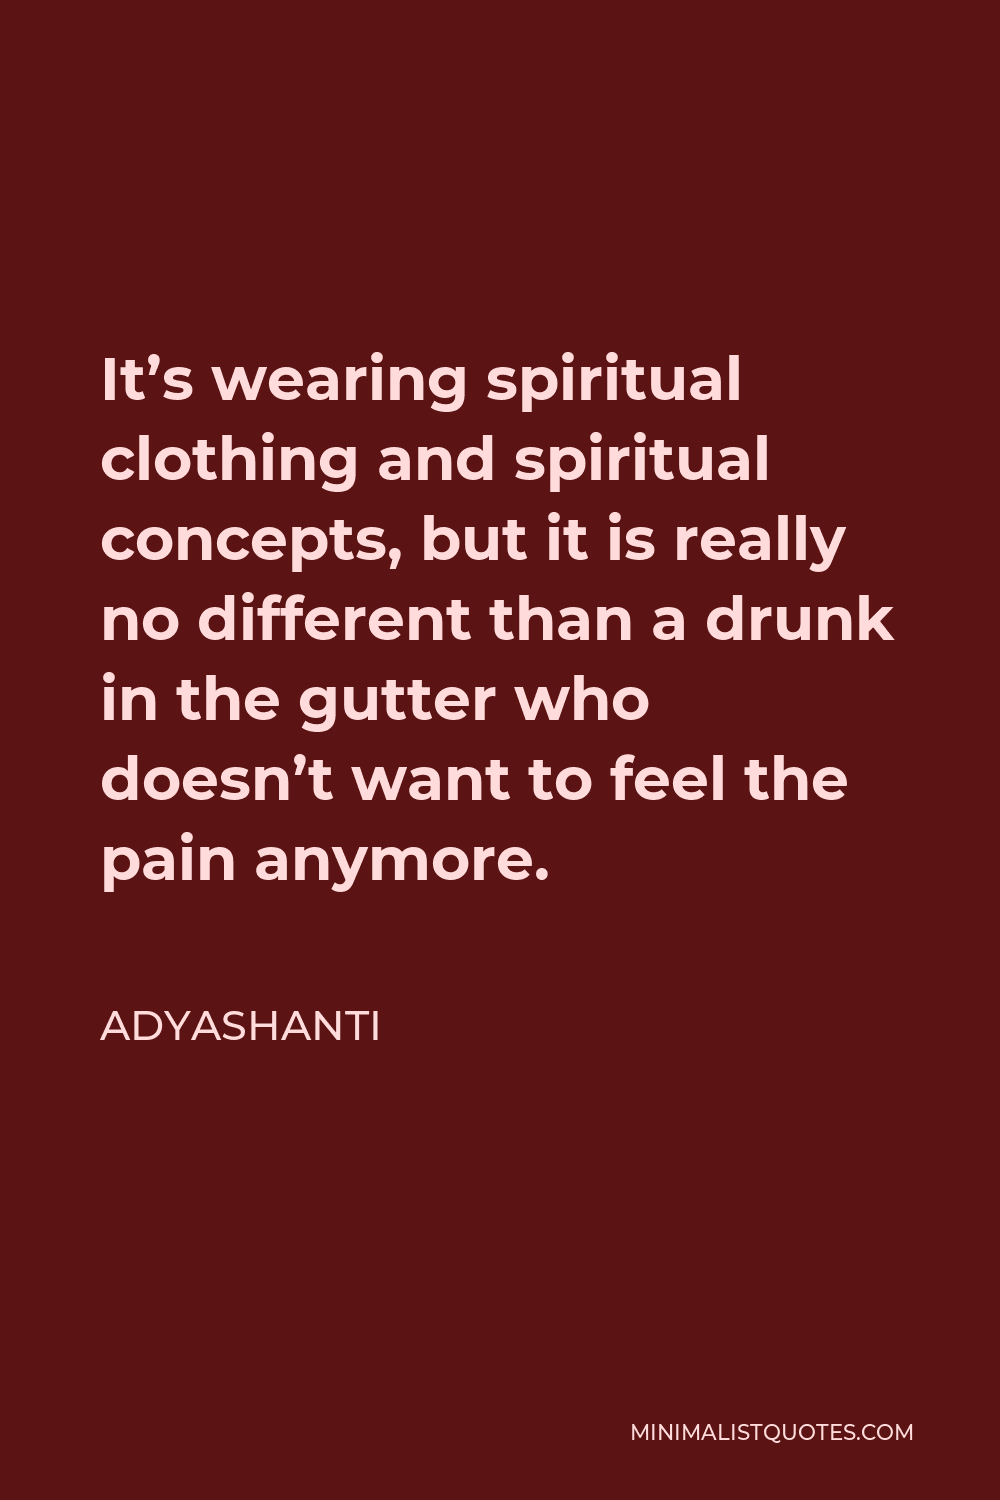 Adyashanti Quote - It’s wearing spiritual clothing and spiritual concepts, but it is really no different than a drunk in the gutter who doesn’t want to feel the pain anymore.